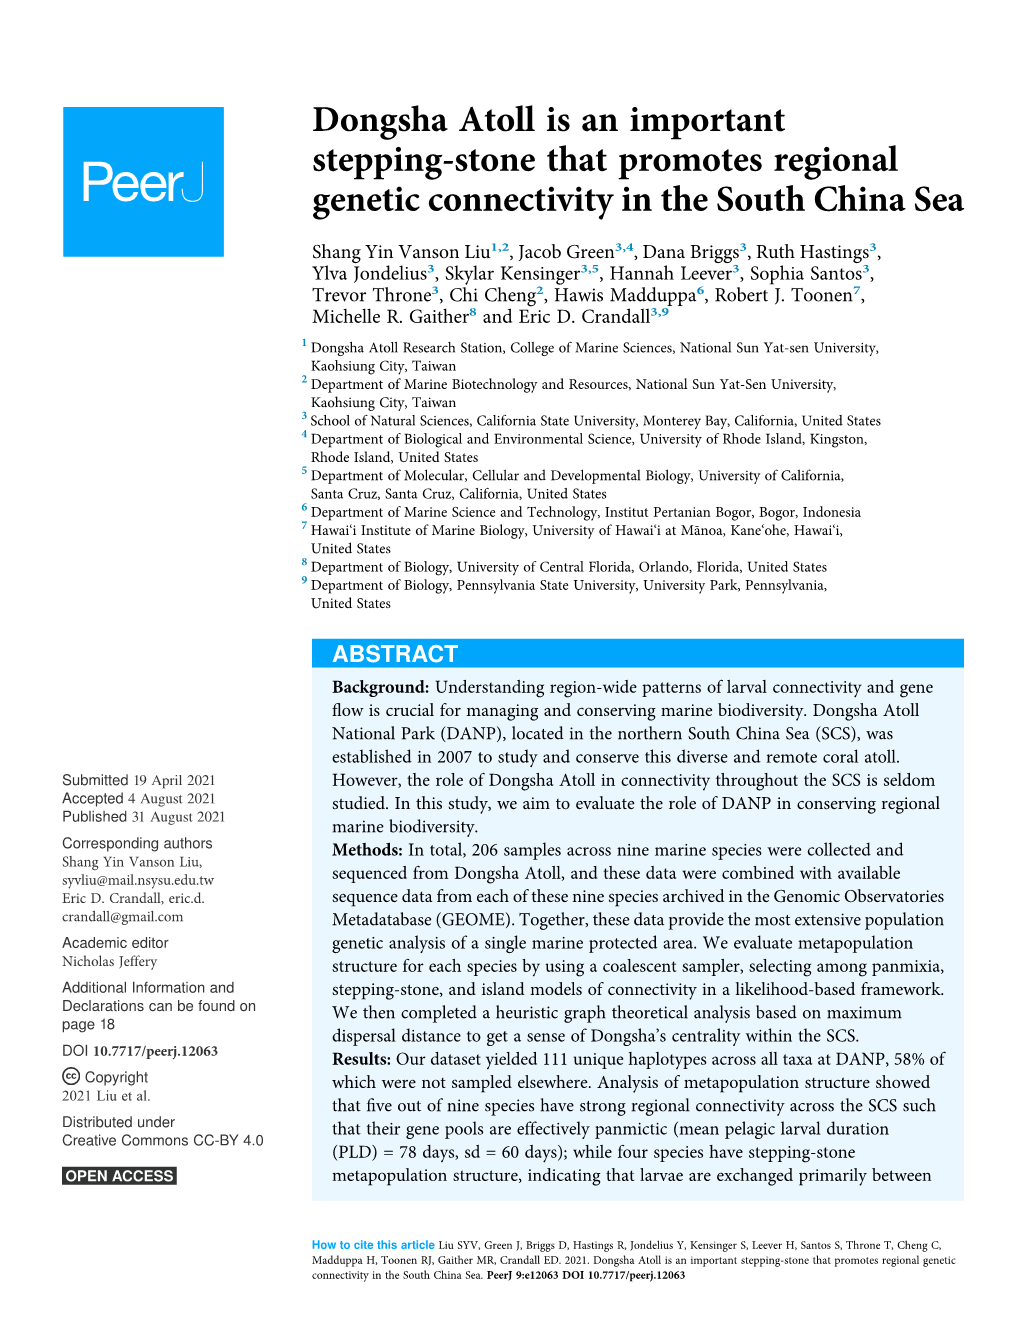 Dongsha Atoll Is an Important Stepping-Stone That Promotes Regional Genetic Connectivity in the South China Sea